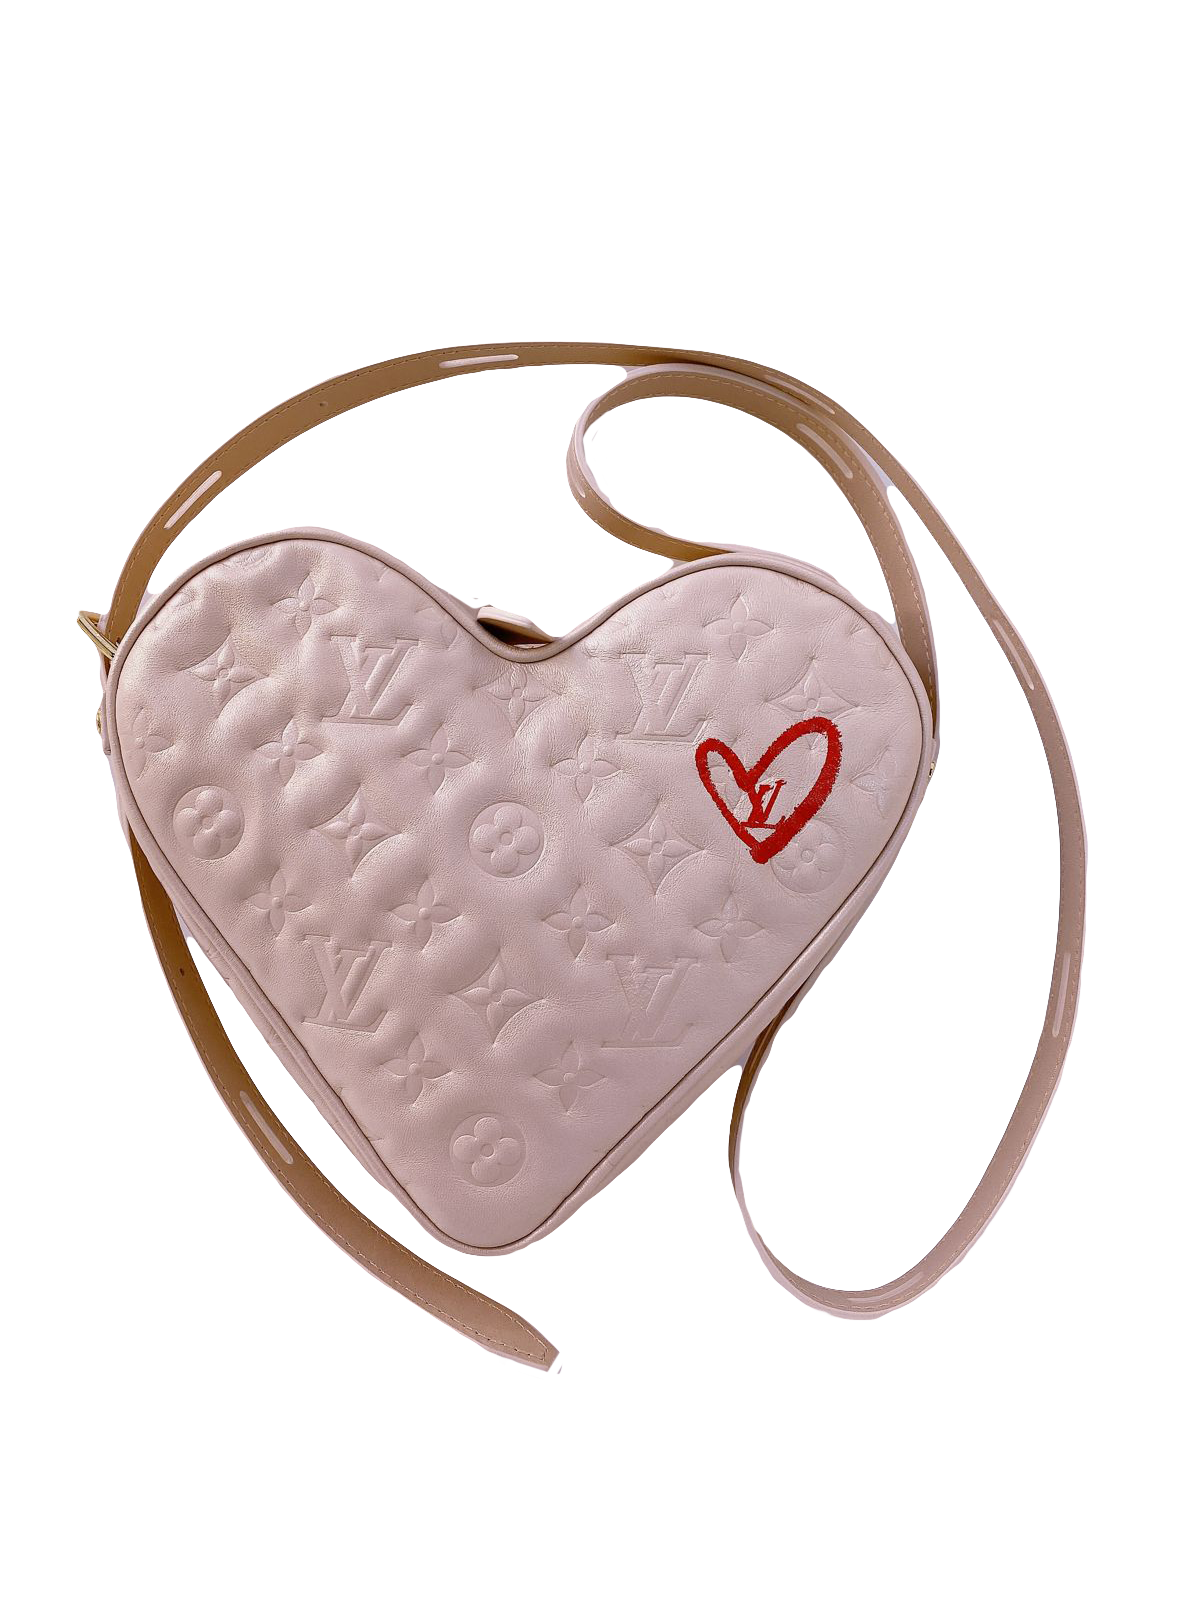 BLUSH PINK MONOGRAM EMBOSSED FALL IN LOVE LIMITED EDITION COEUR CROSSBODY  BAG - styleforless